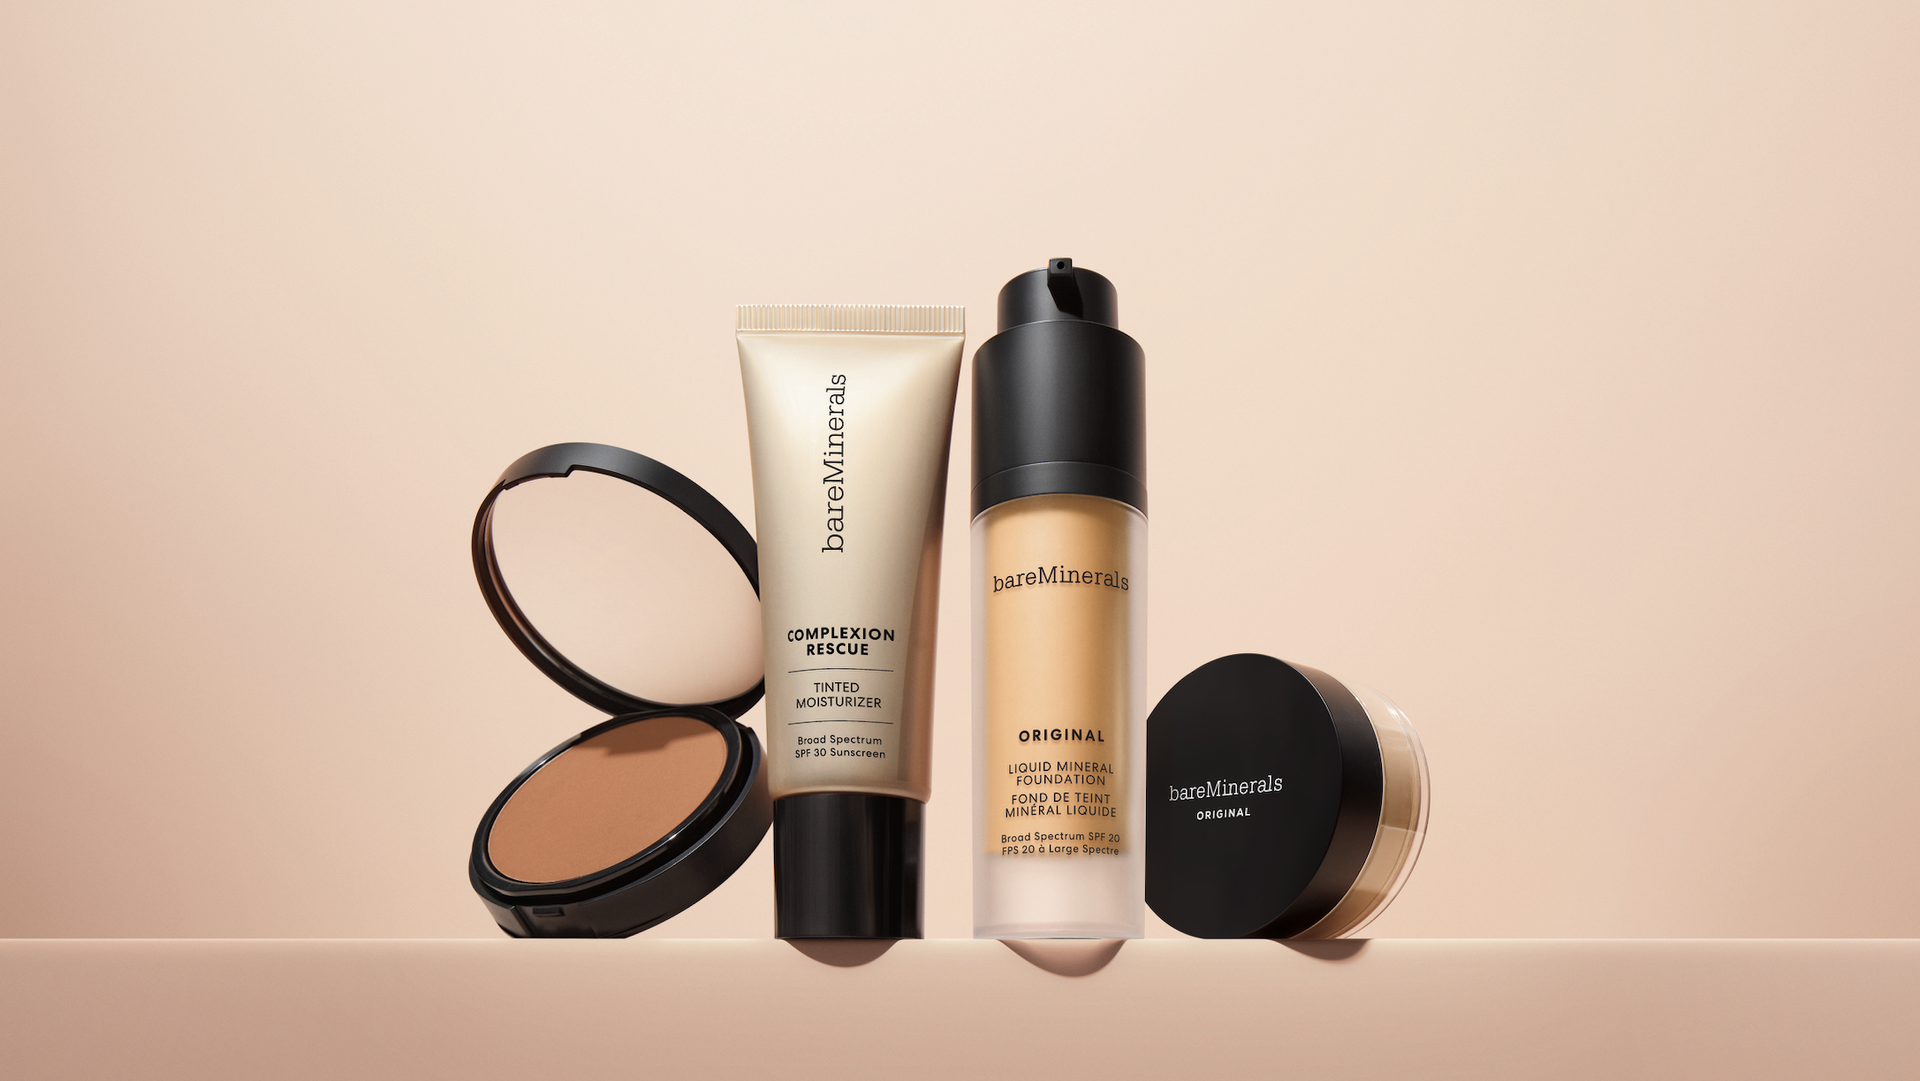 bareMinerals Teacher Discount | Education Discounts on bareMinerals Beauty Products